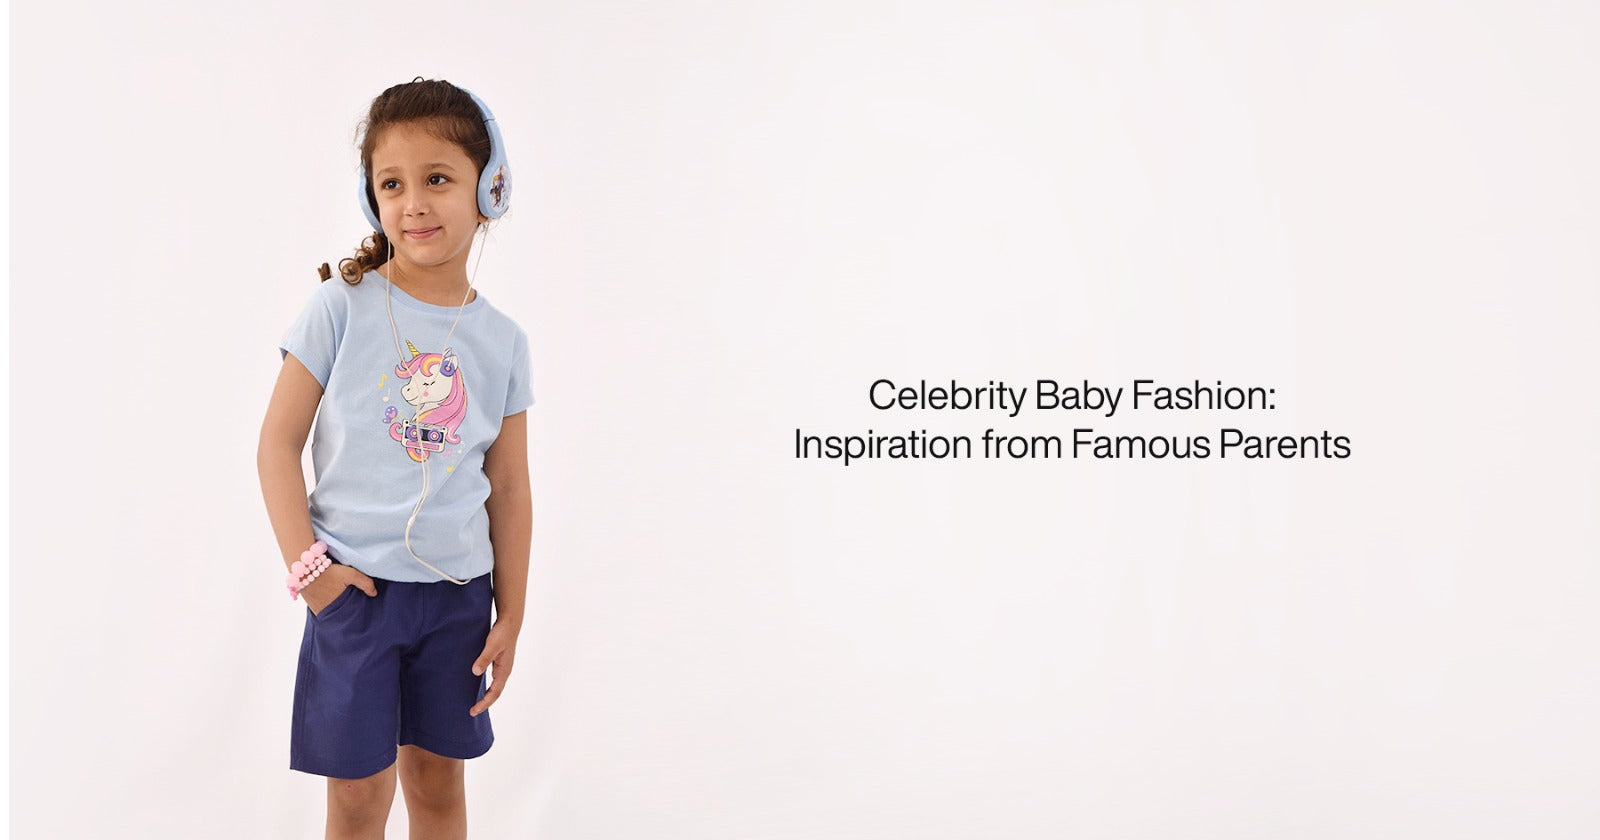 Celebrity Baby Fashion: Inspiration from Famous Parents